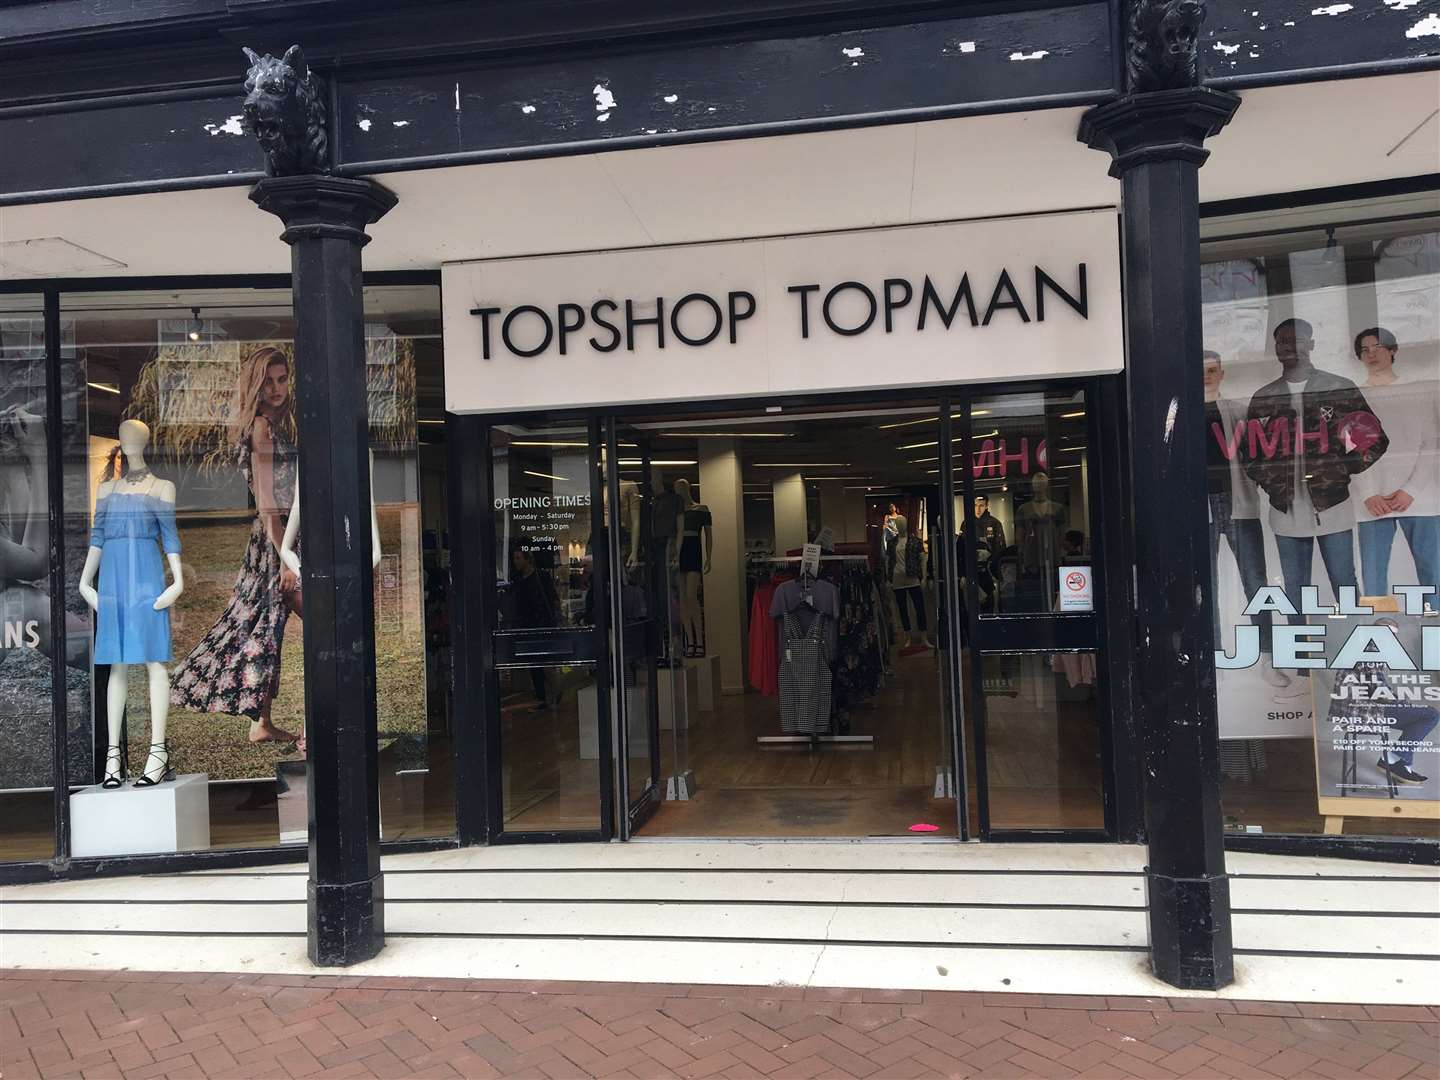 The Arcadia Group also owns Topshop